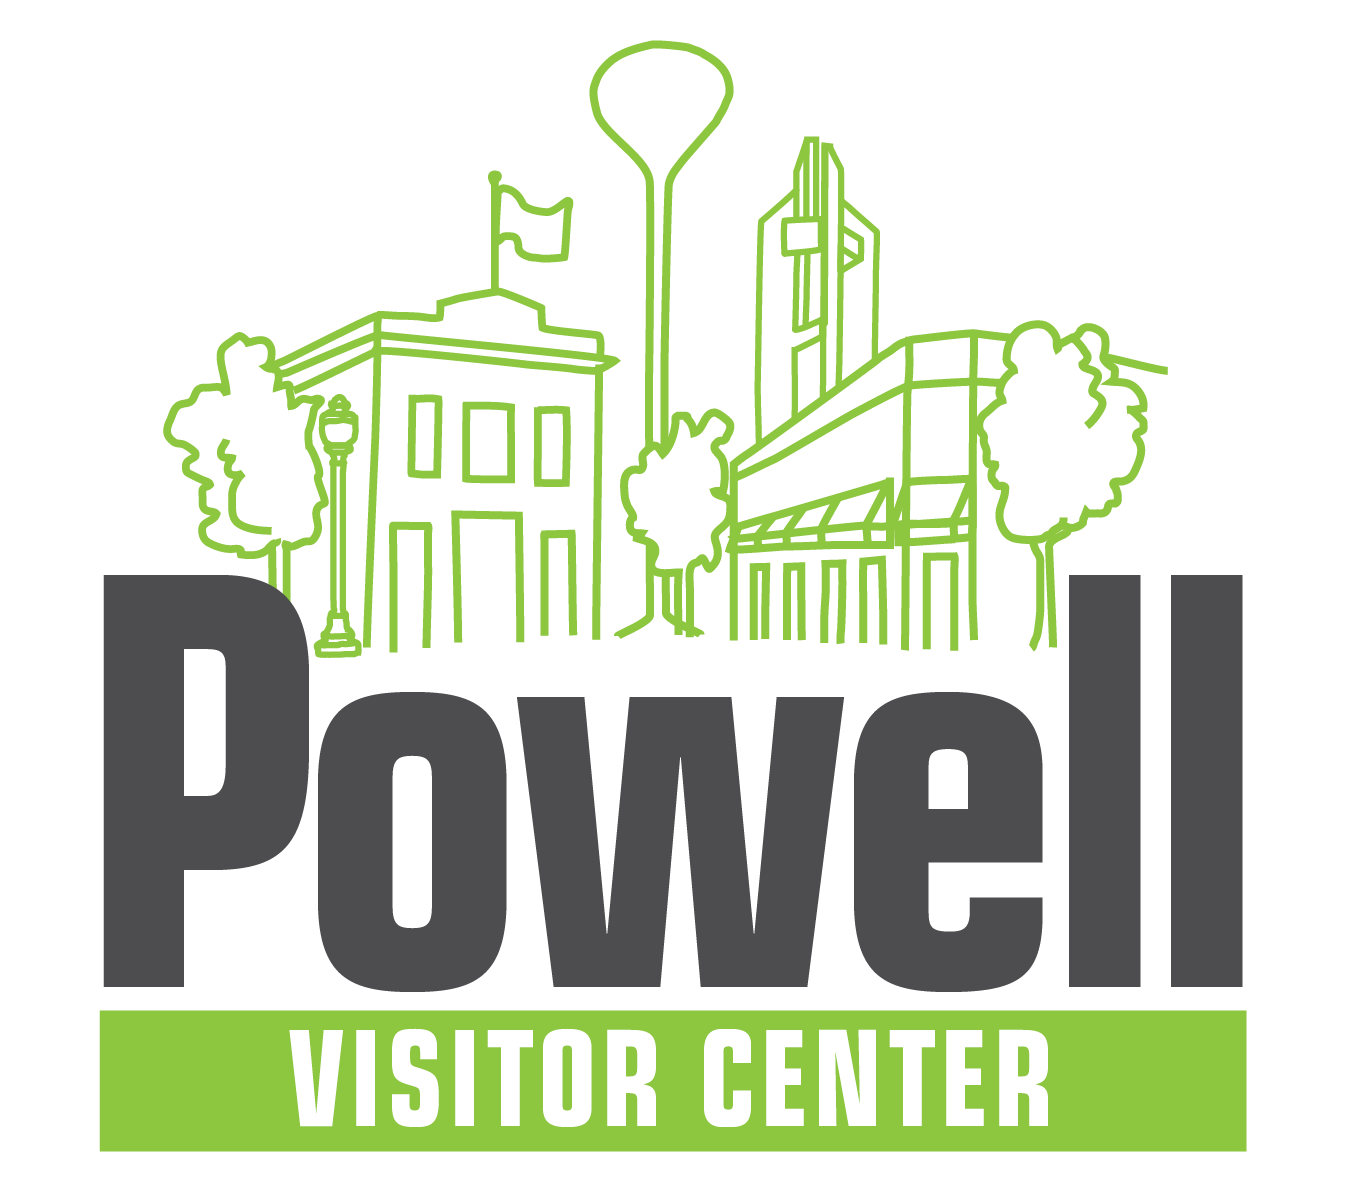 Transparent image of the Powell Visitor Center Logo